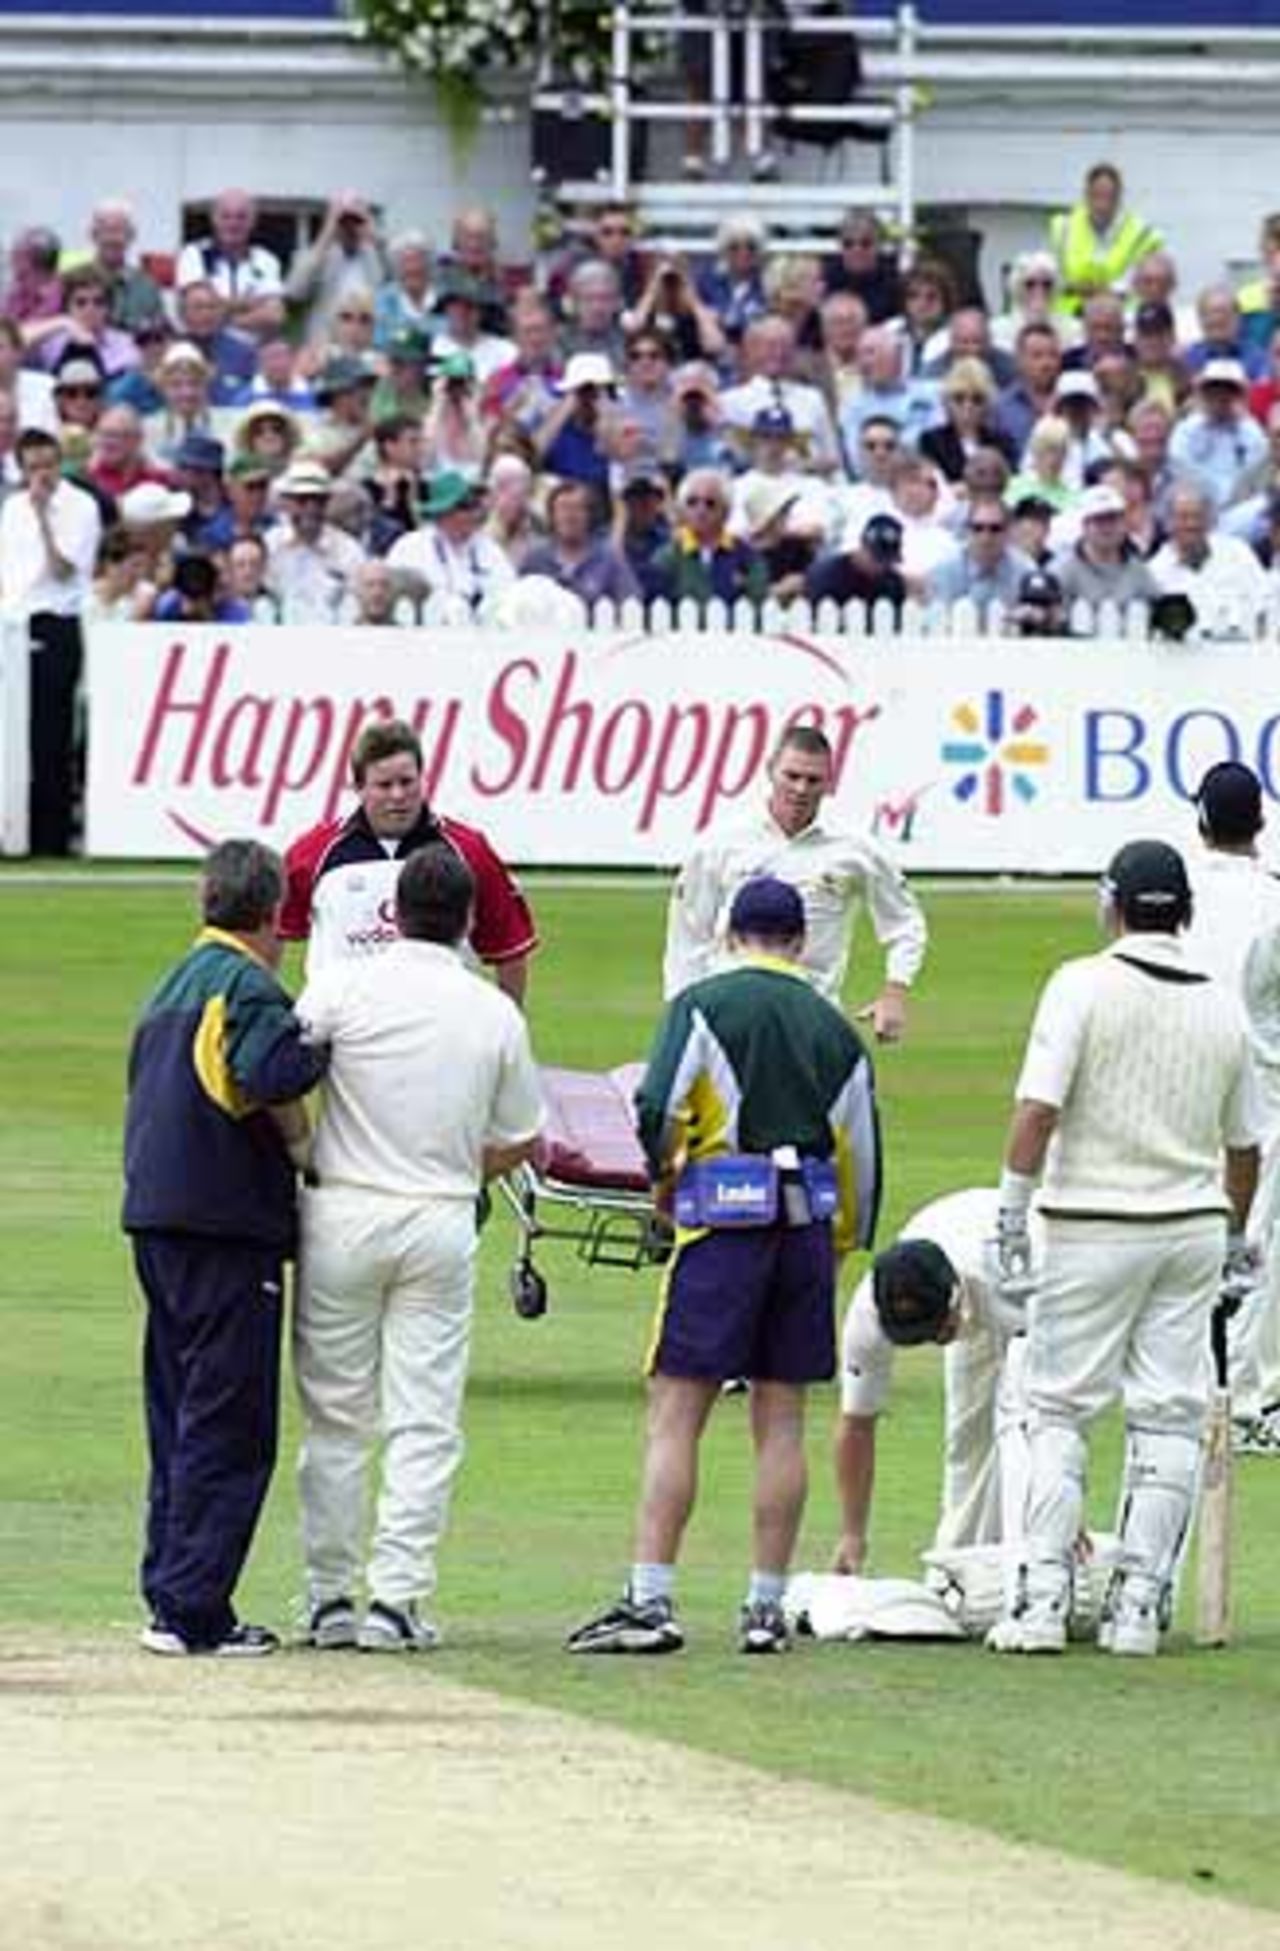 The stretcher comes on for the injured Steve Waugh, England v Australia, The Ashes 3rd npower Test, Nottingham, 02-06 Aug 2001